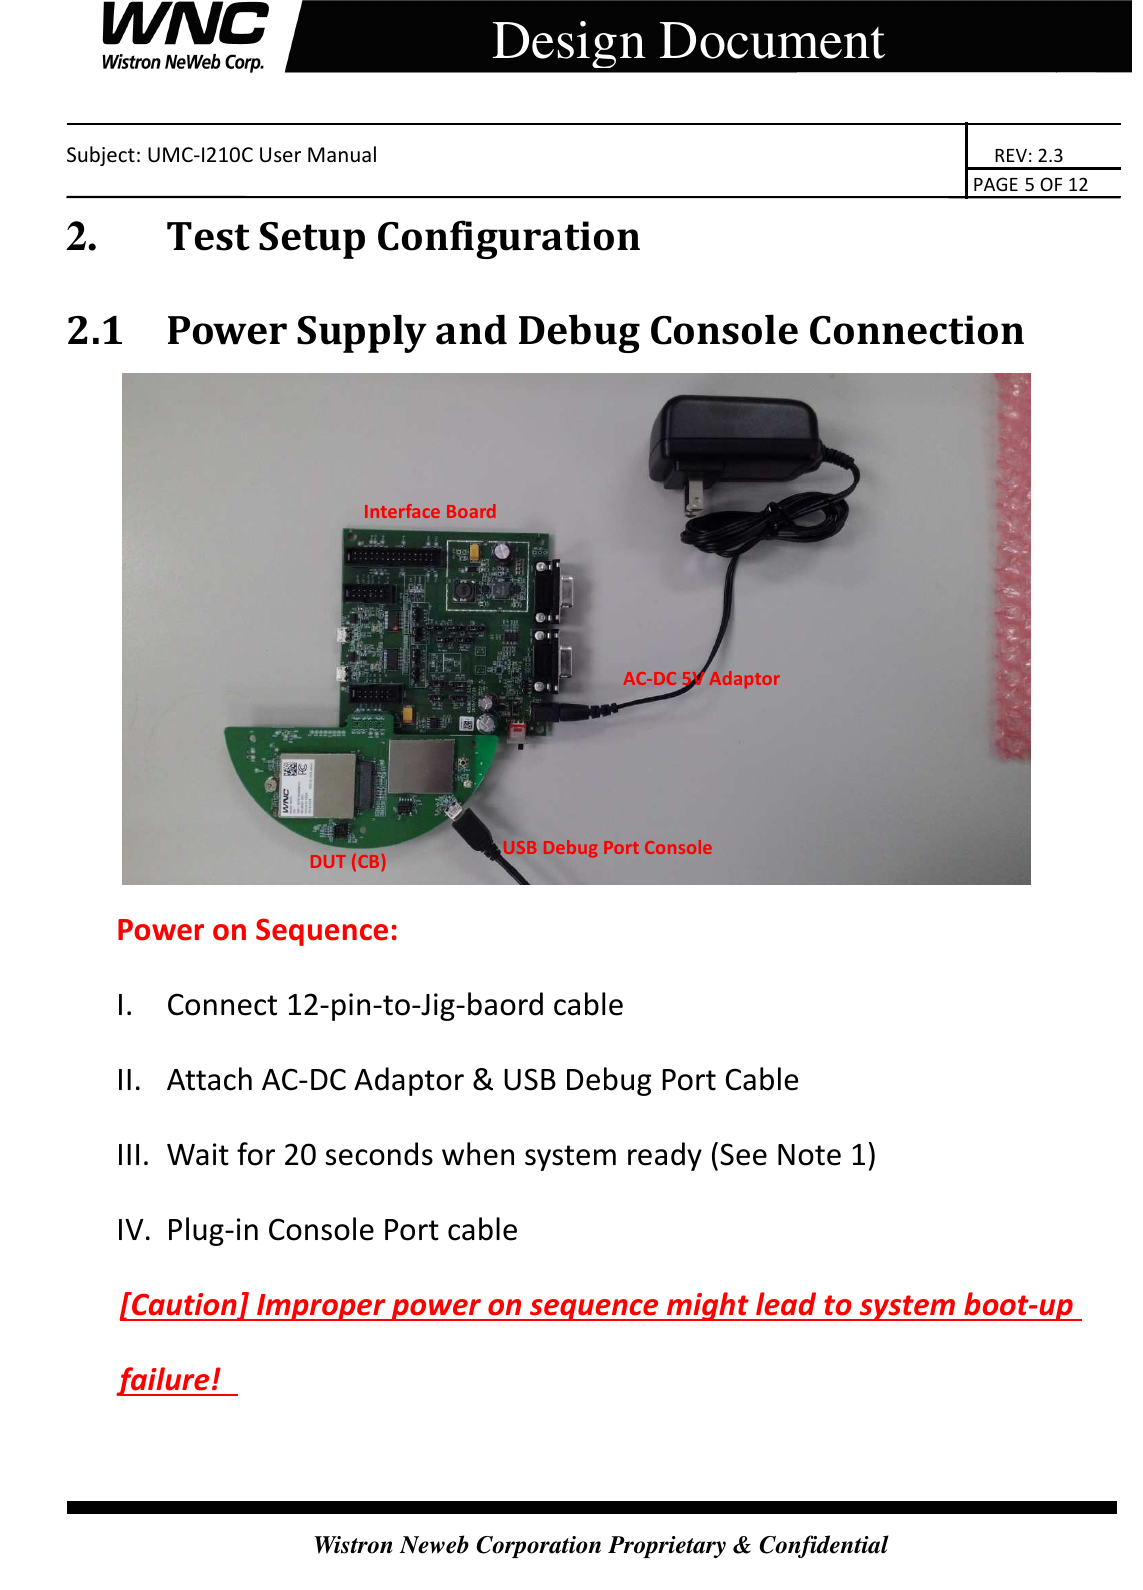    Subject: UMC-I210C User Manual                                                                       REV: 2.3                                                                                                                                                                               PAGE 5 OF 12  Wistron Neweb Corporation Proprietary &amp; Confidential     Design Document 2.       Test Setup Configuration 2.1 Power Supply and Debug Console Connection  Power on Sequence: I. Connect 12-pin-to-Jig-baord cable II. Attach AC-DC Adaptor &amp; USB Debug Port Cable III. Wait for 20 seconds when system ready (See Note 1) IV. Plug-in Console Port cable   [Caution] Improper power on sequence might lead to system boot-up failure!   AC-DC 5V Adaptor Interface Board  DUT (CB) USB Debug Port Console 